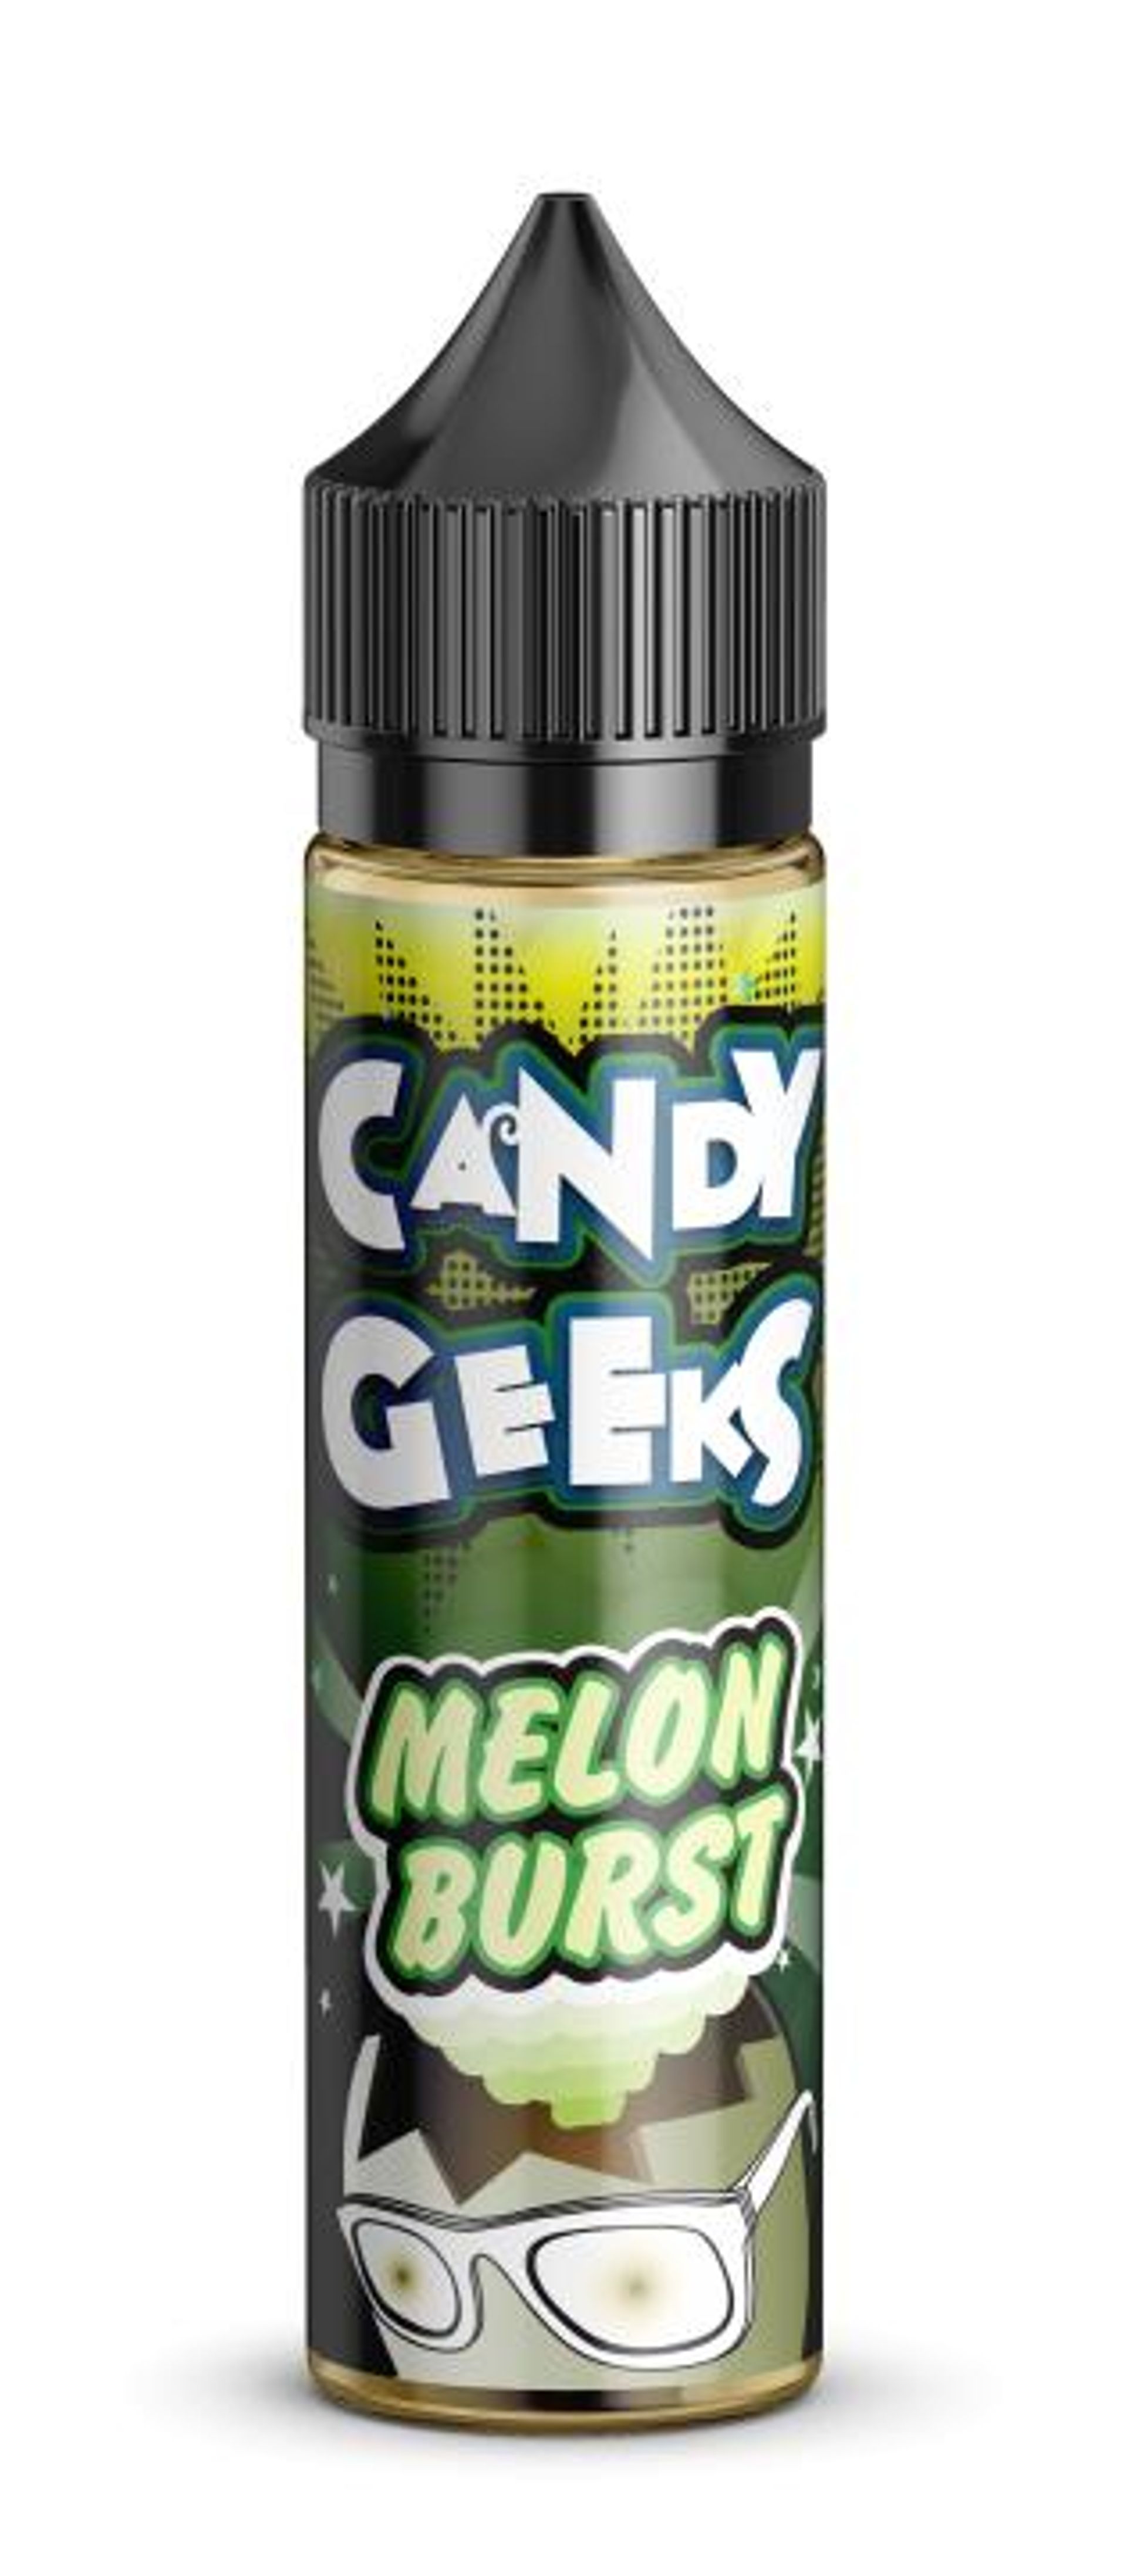 Image of Melon Burst by Candy Geeks